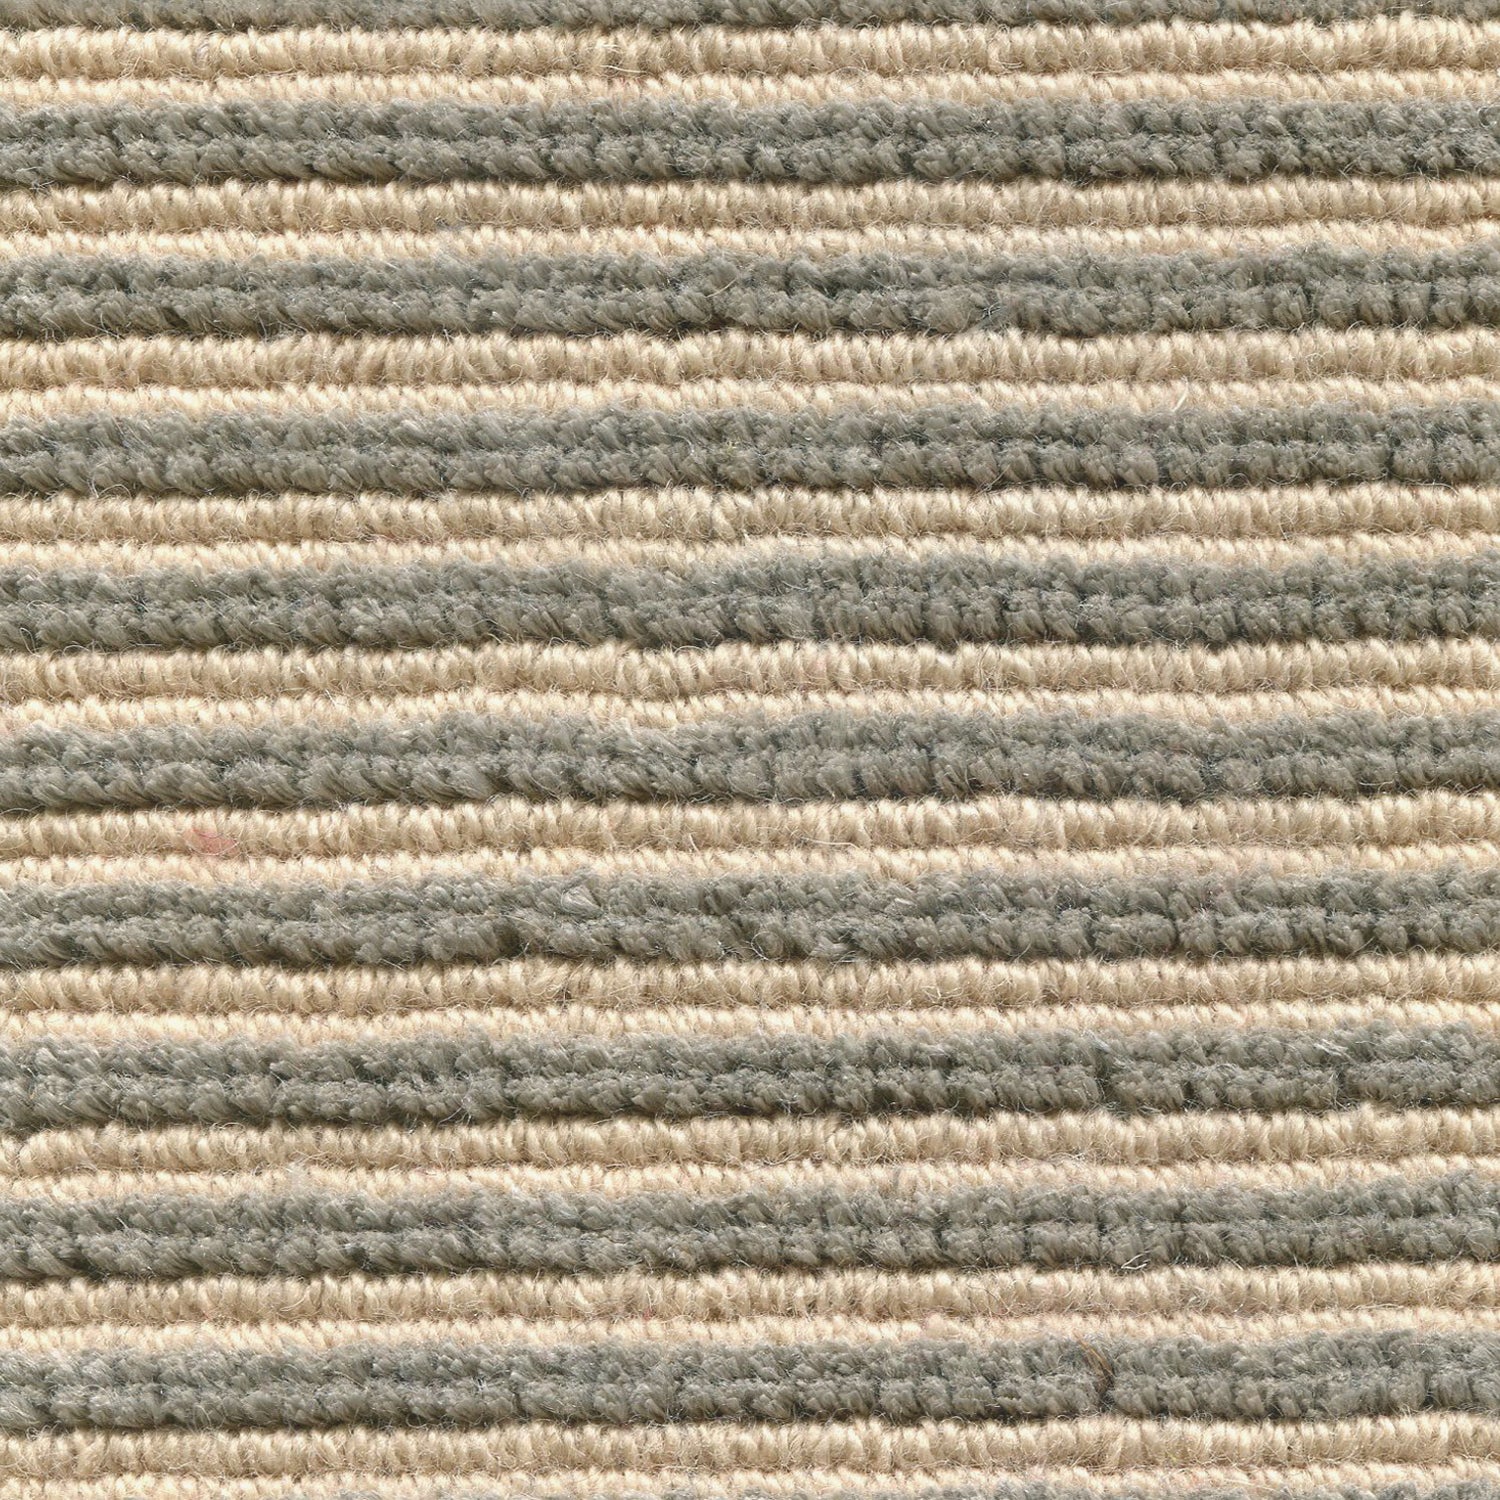 Wool-linen broadloom carpet swatch in a chunky striped weave in cream and gray.